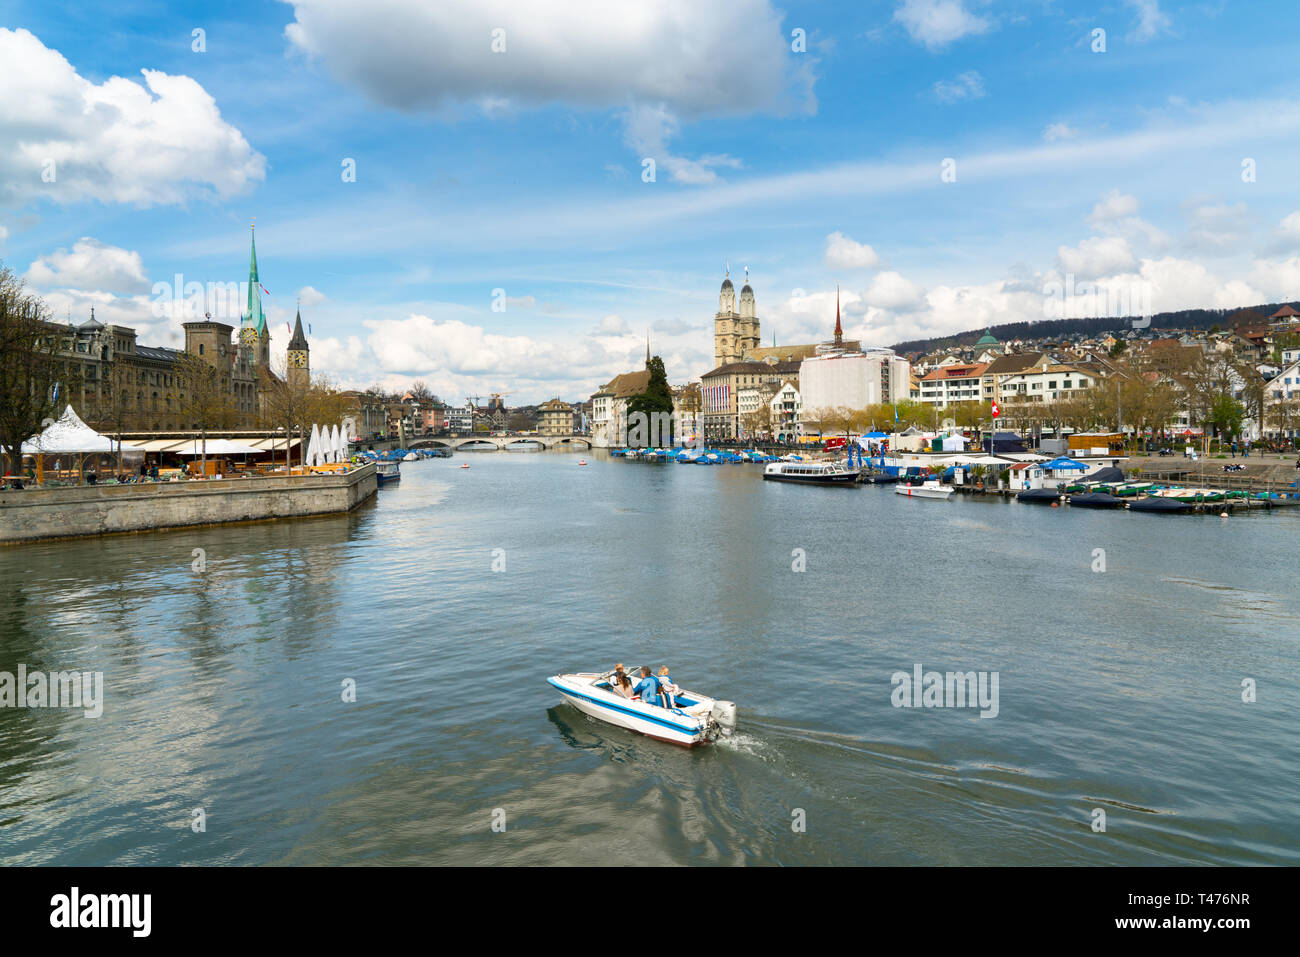 Zurich, ZH / Switzerland - April 8, 2019: Zurich cityscape with the river Limmat during the traditional spring festival of Sechselauten in April Stock Photo